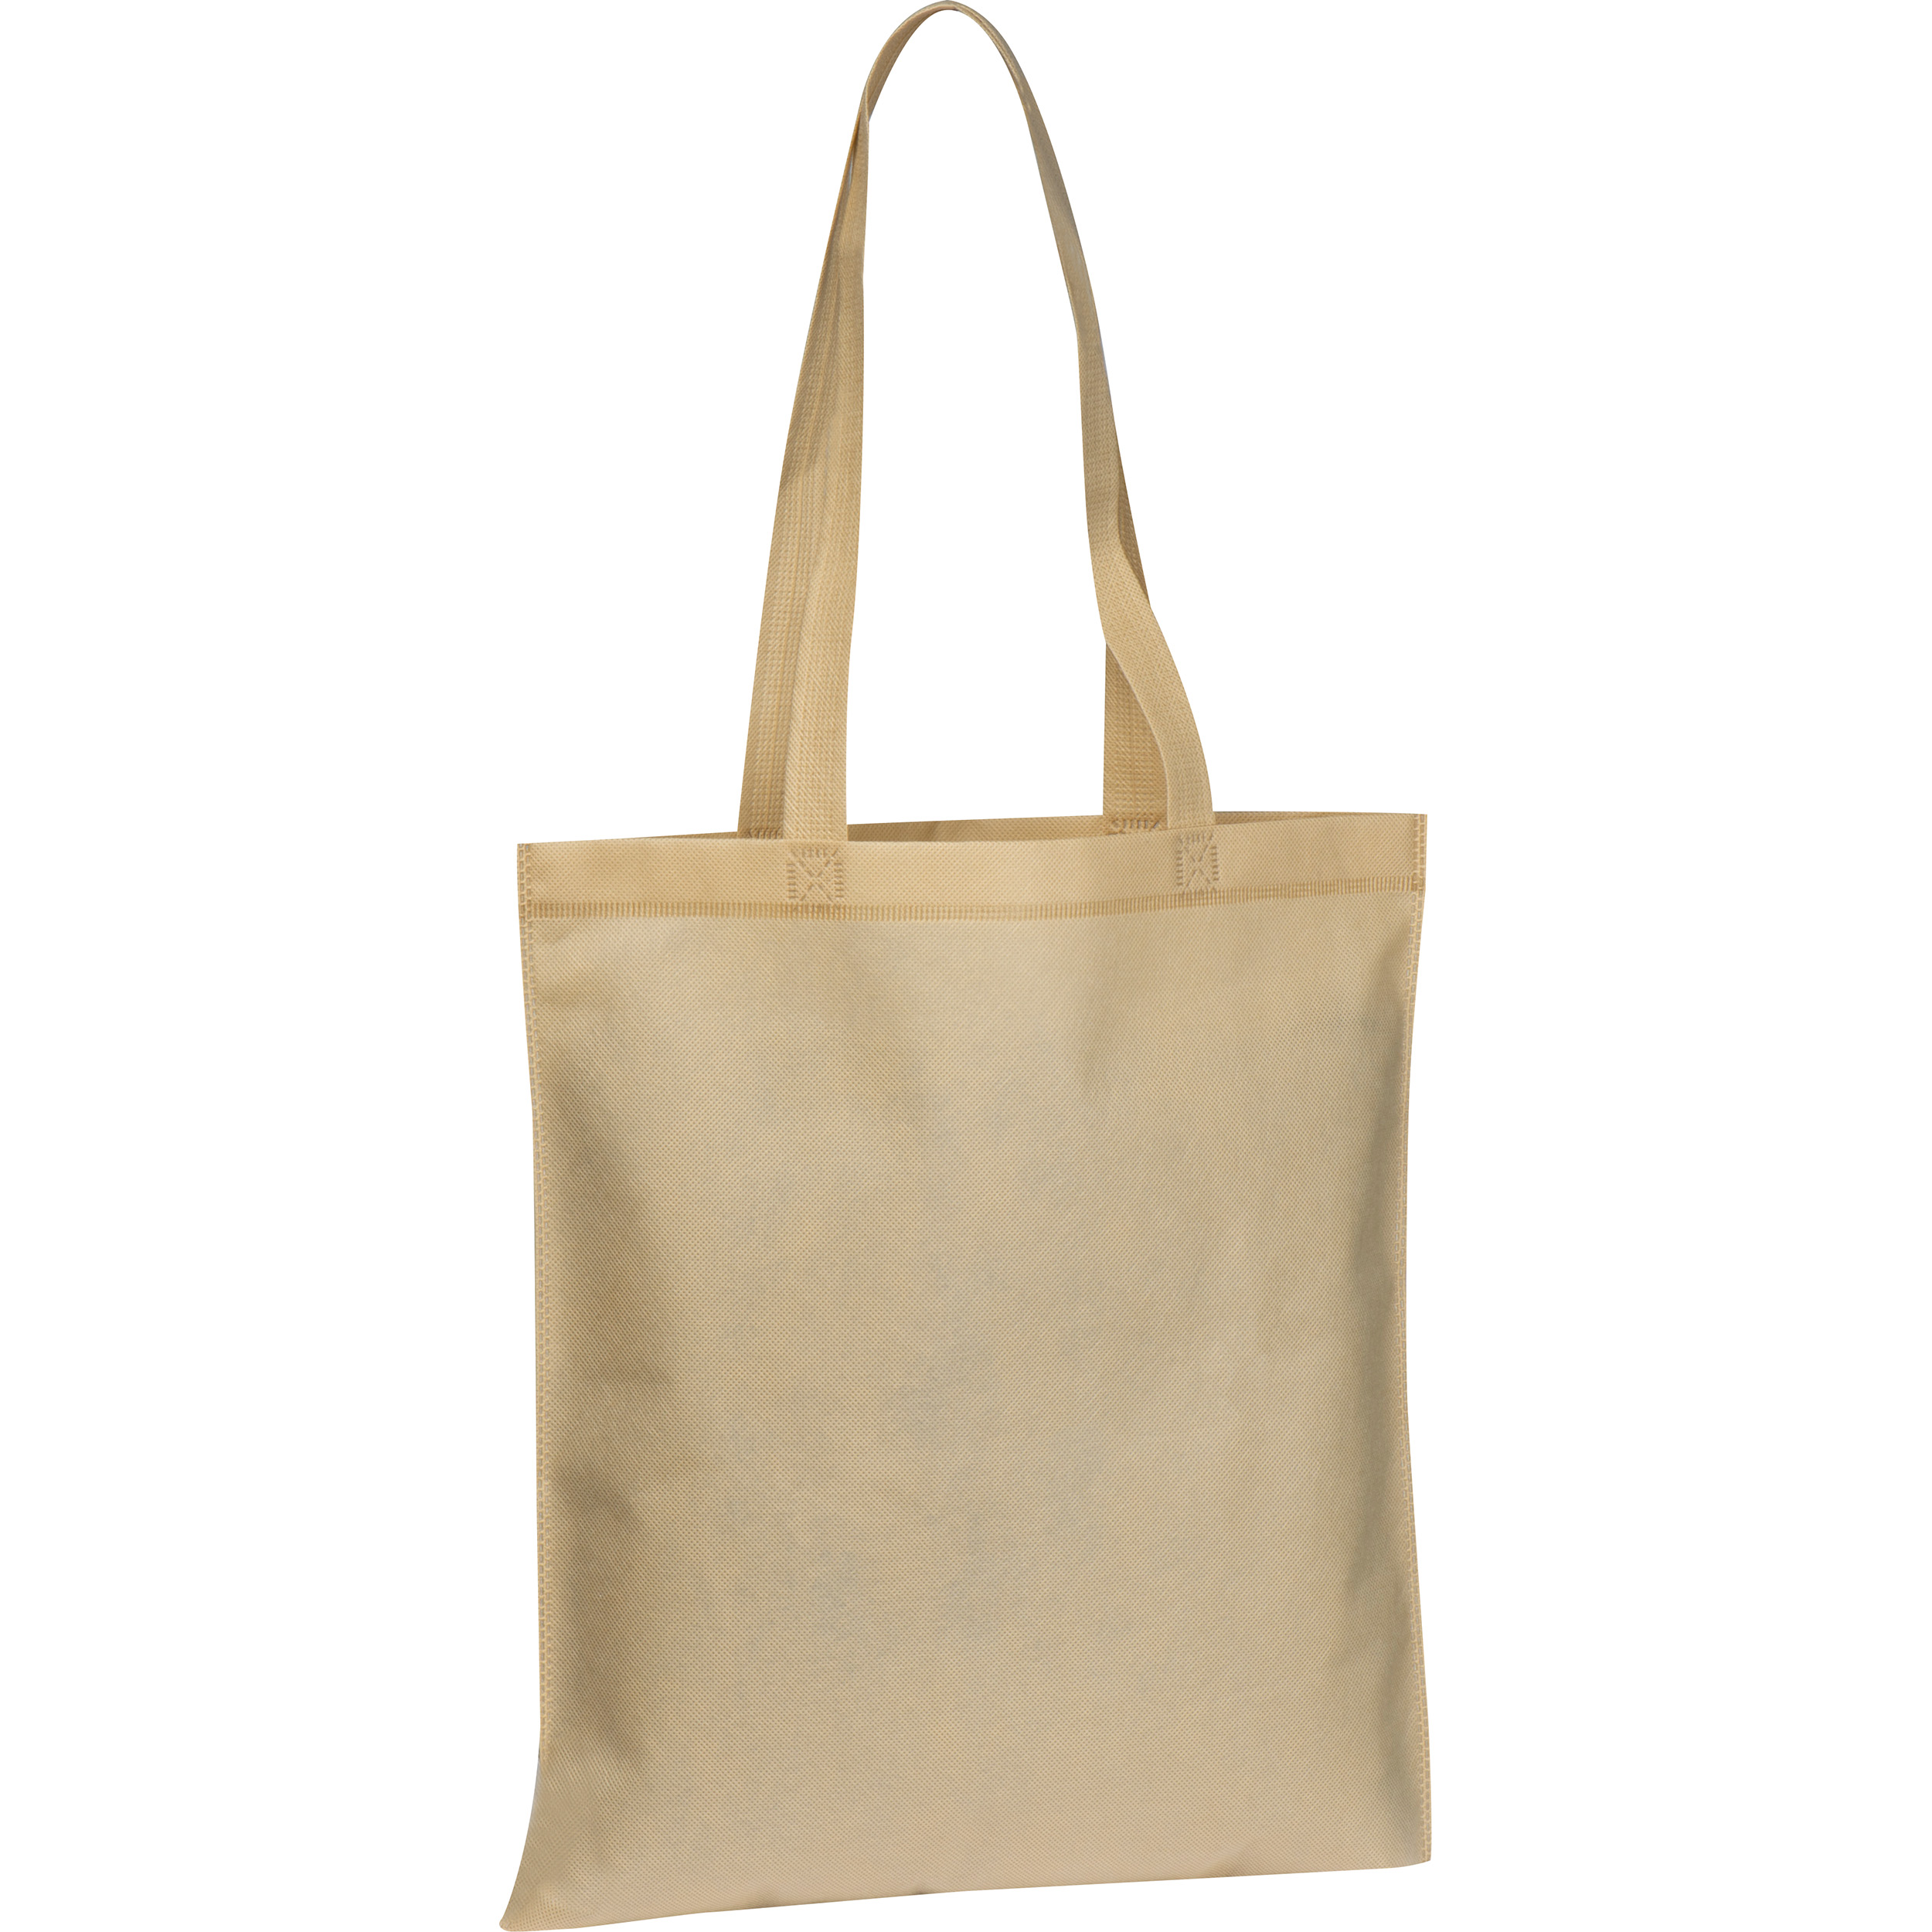 Promotional Tote Bag - Beckley - West Meon